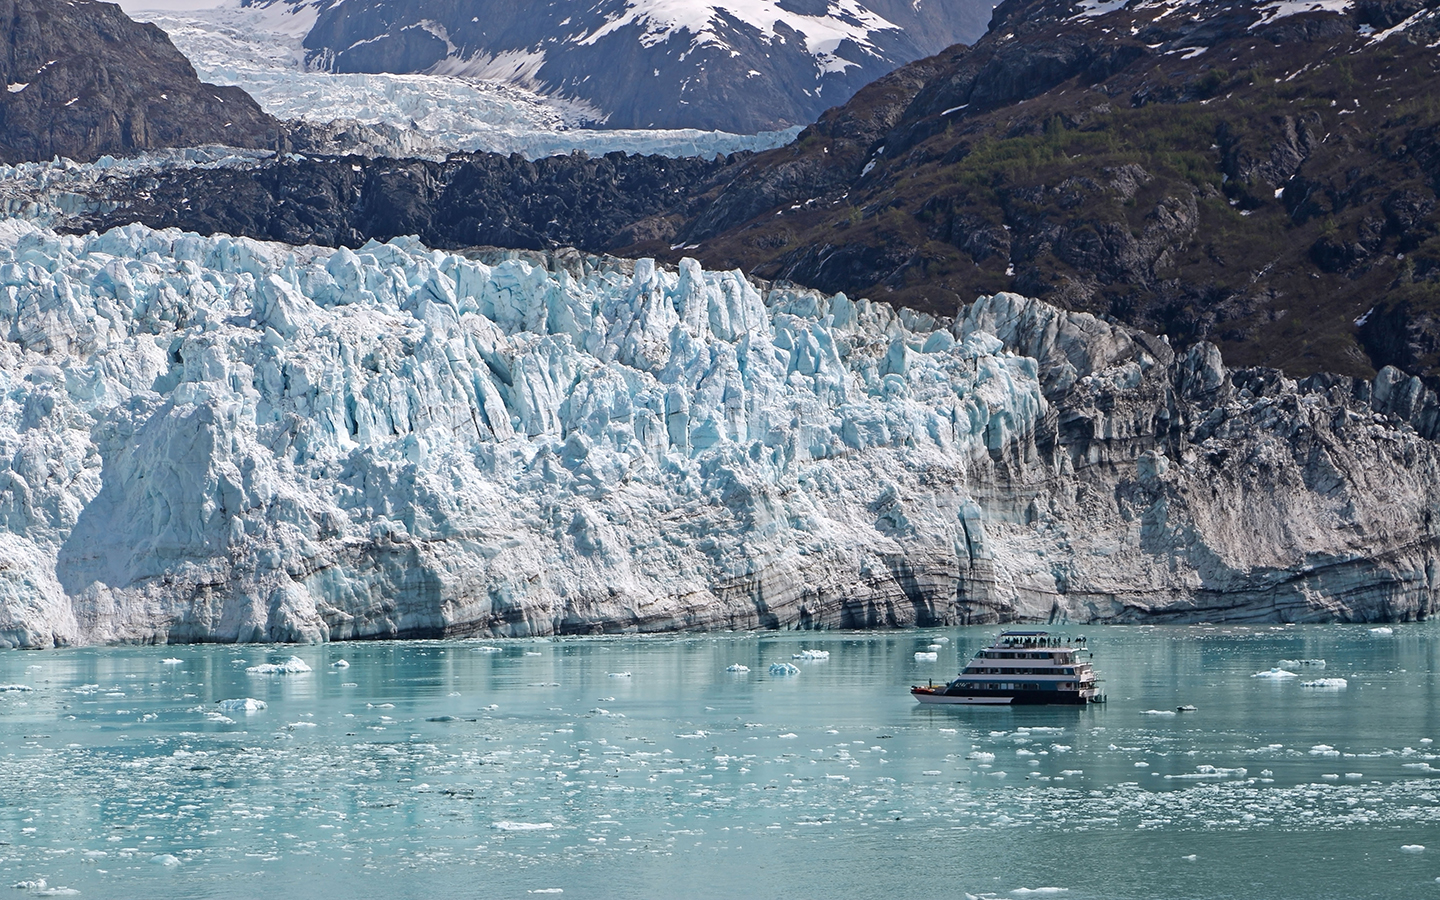 A small ship is seen alone and dwarfed in front of the blue and white Margerie Glacier at Glacier Bay National Park, Alaska